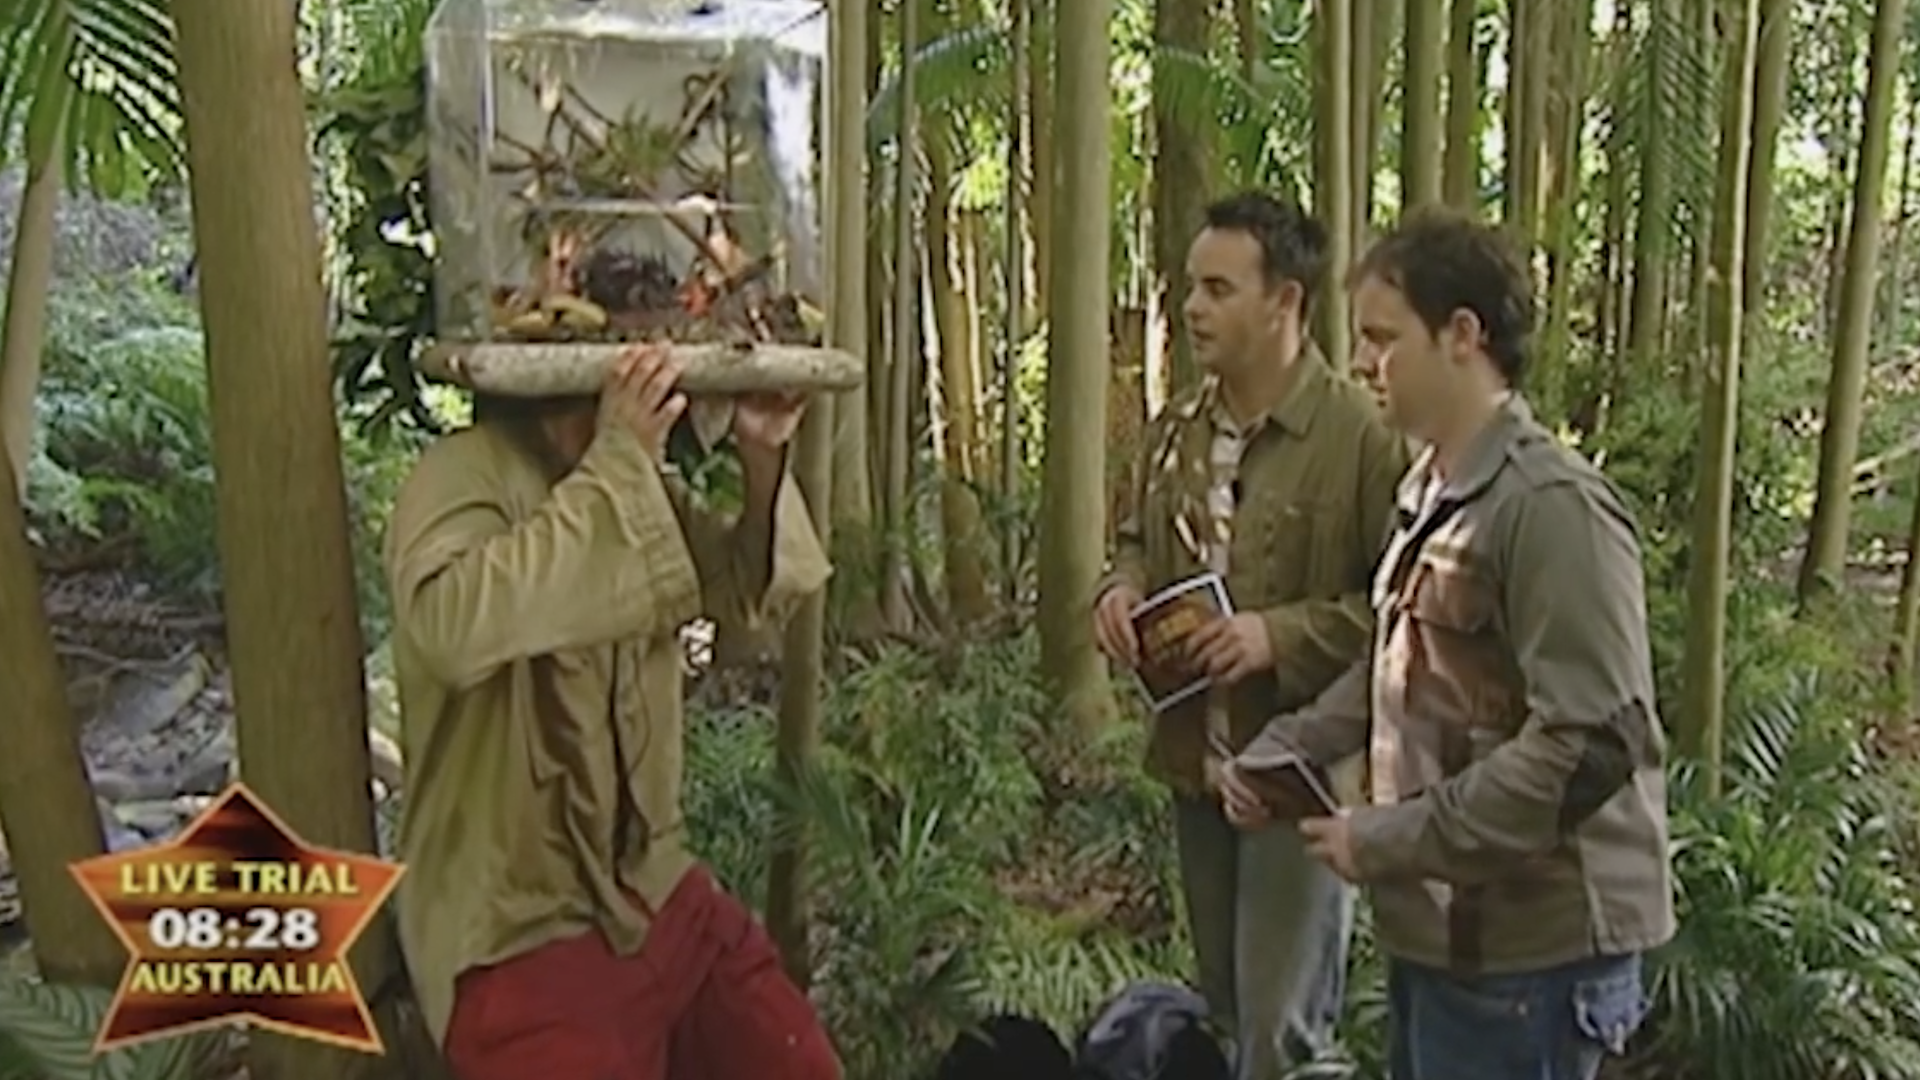 A scene from 2002's I'm A Celebrity... Get Me Out Of Here! featuring Peter Andre, Ant and Dec